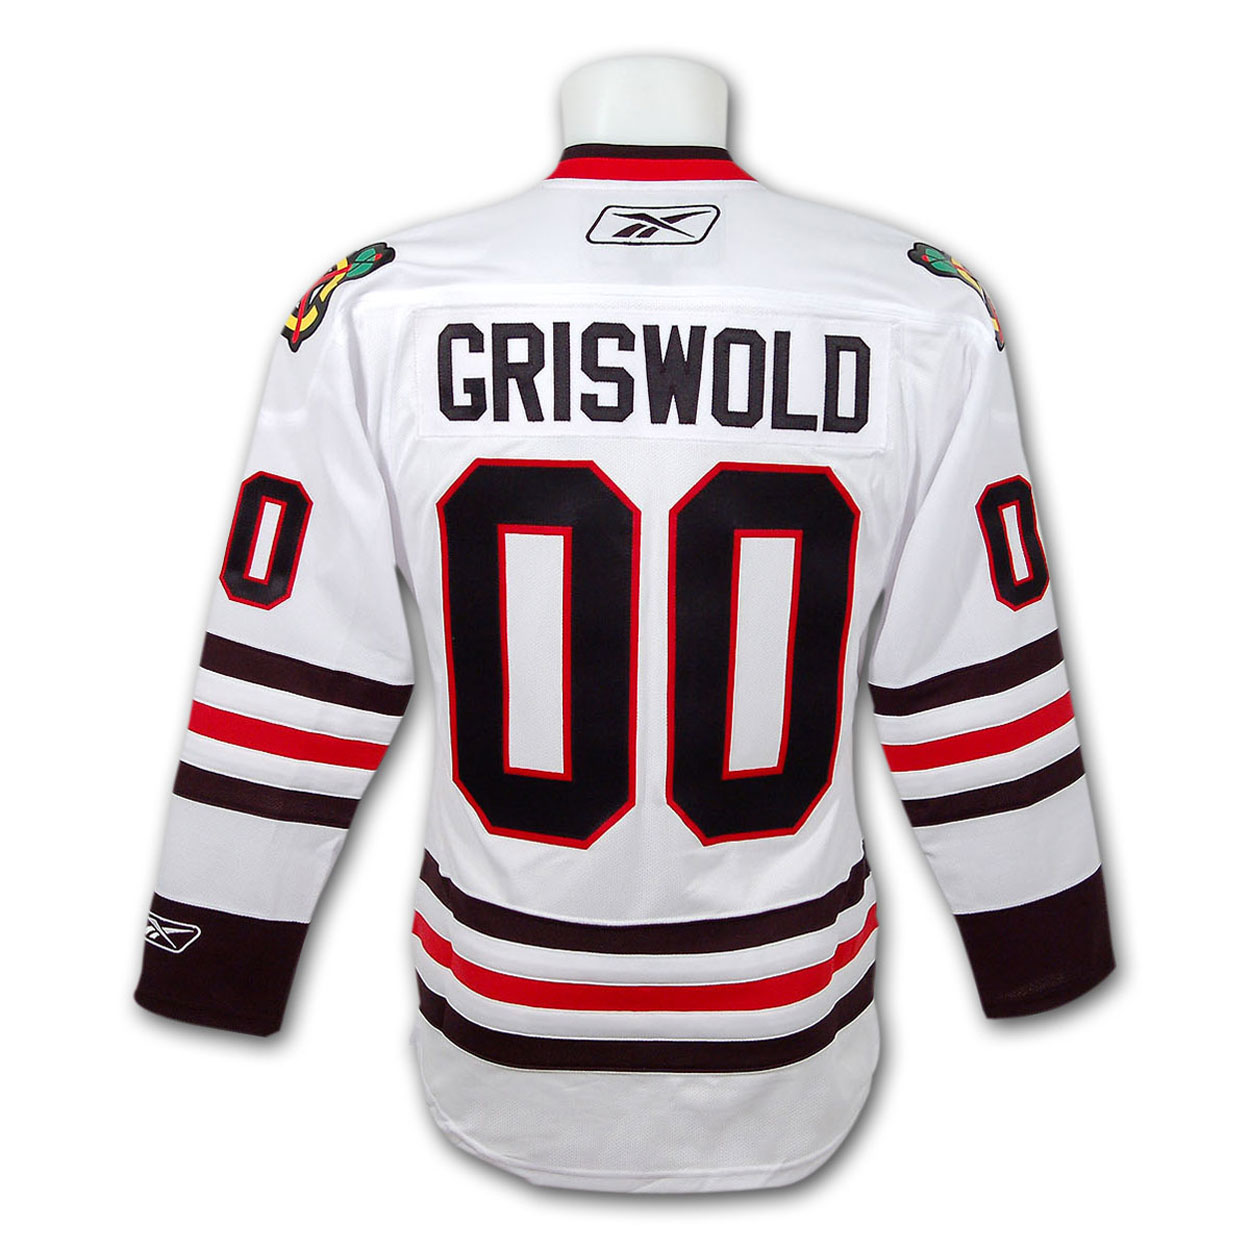 griswold_jersey_2.jpg